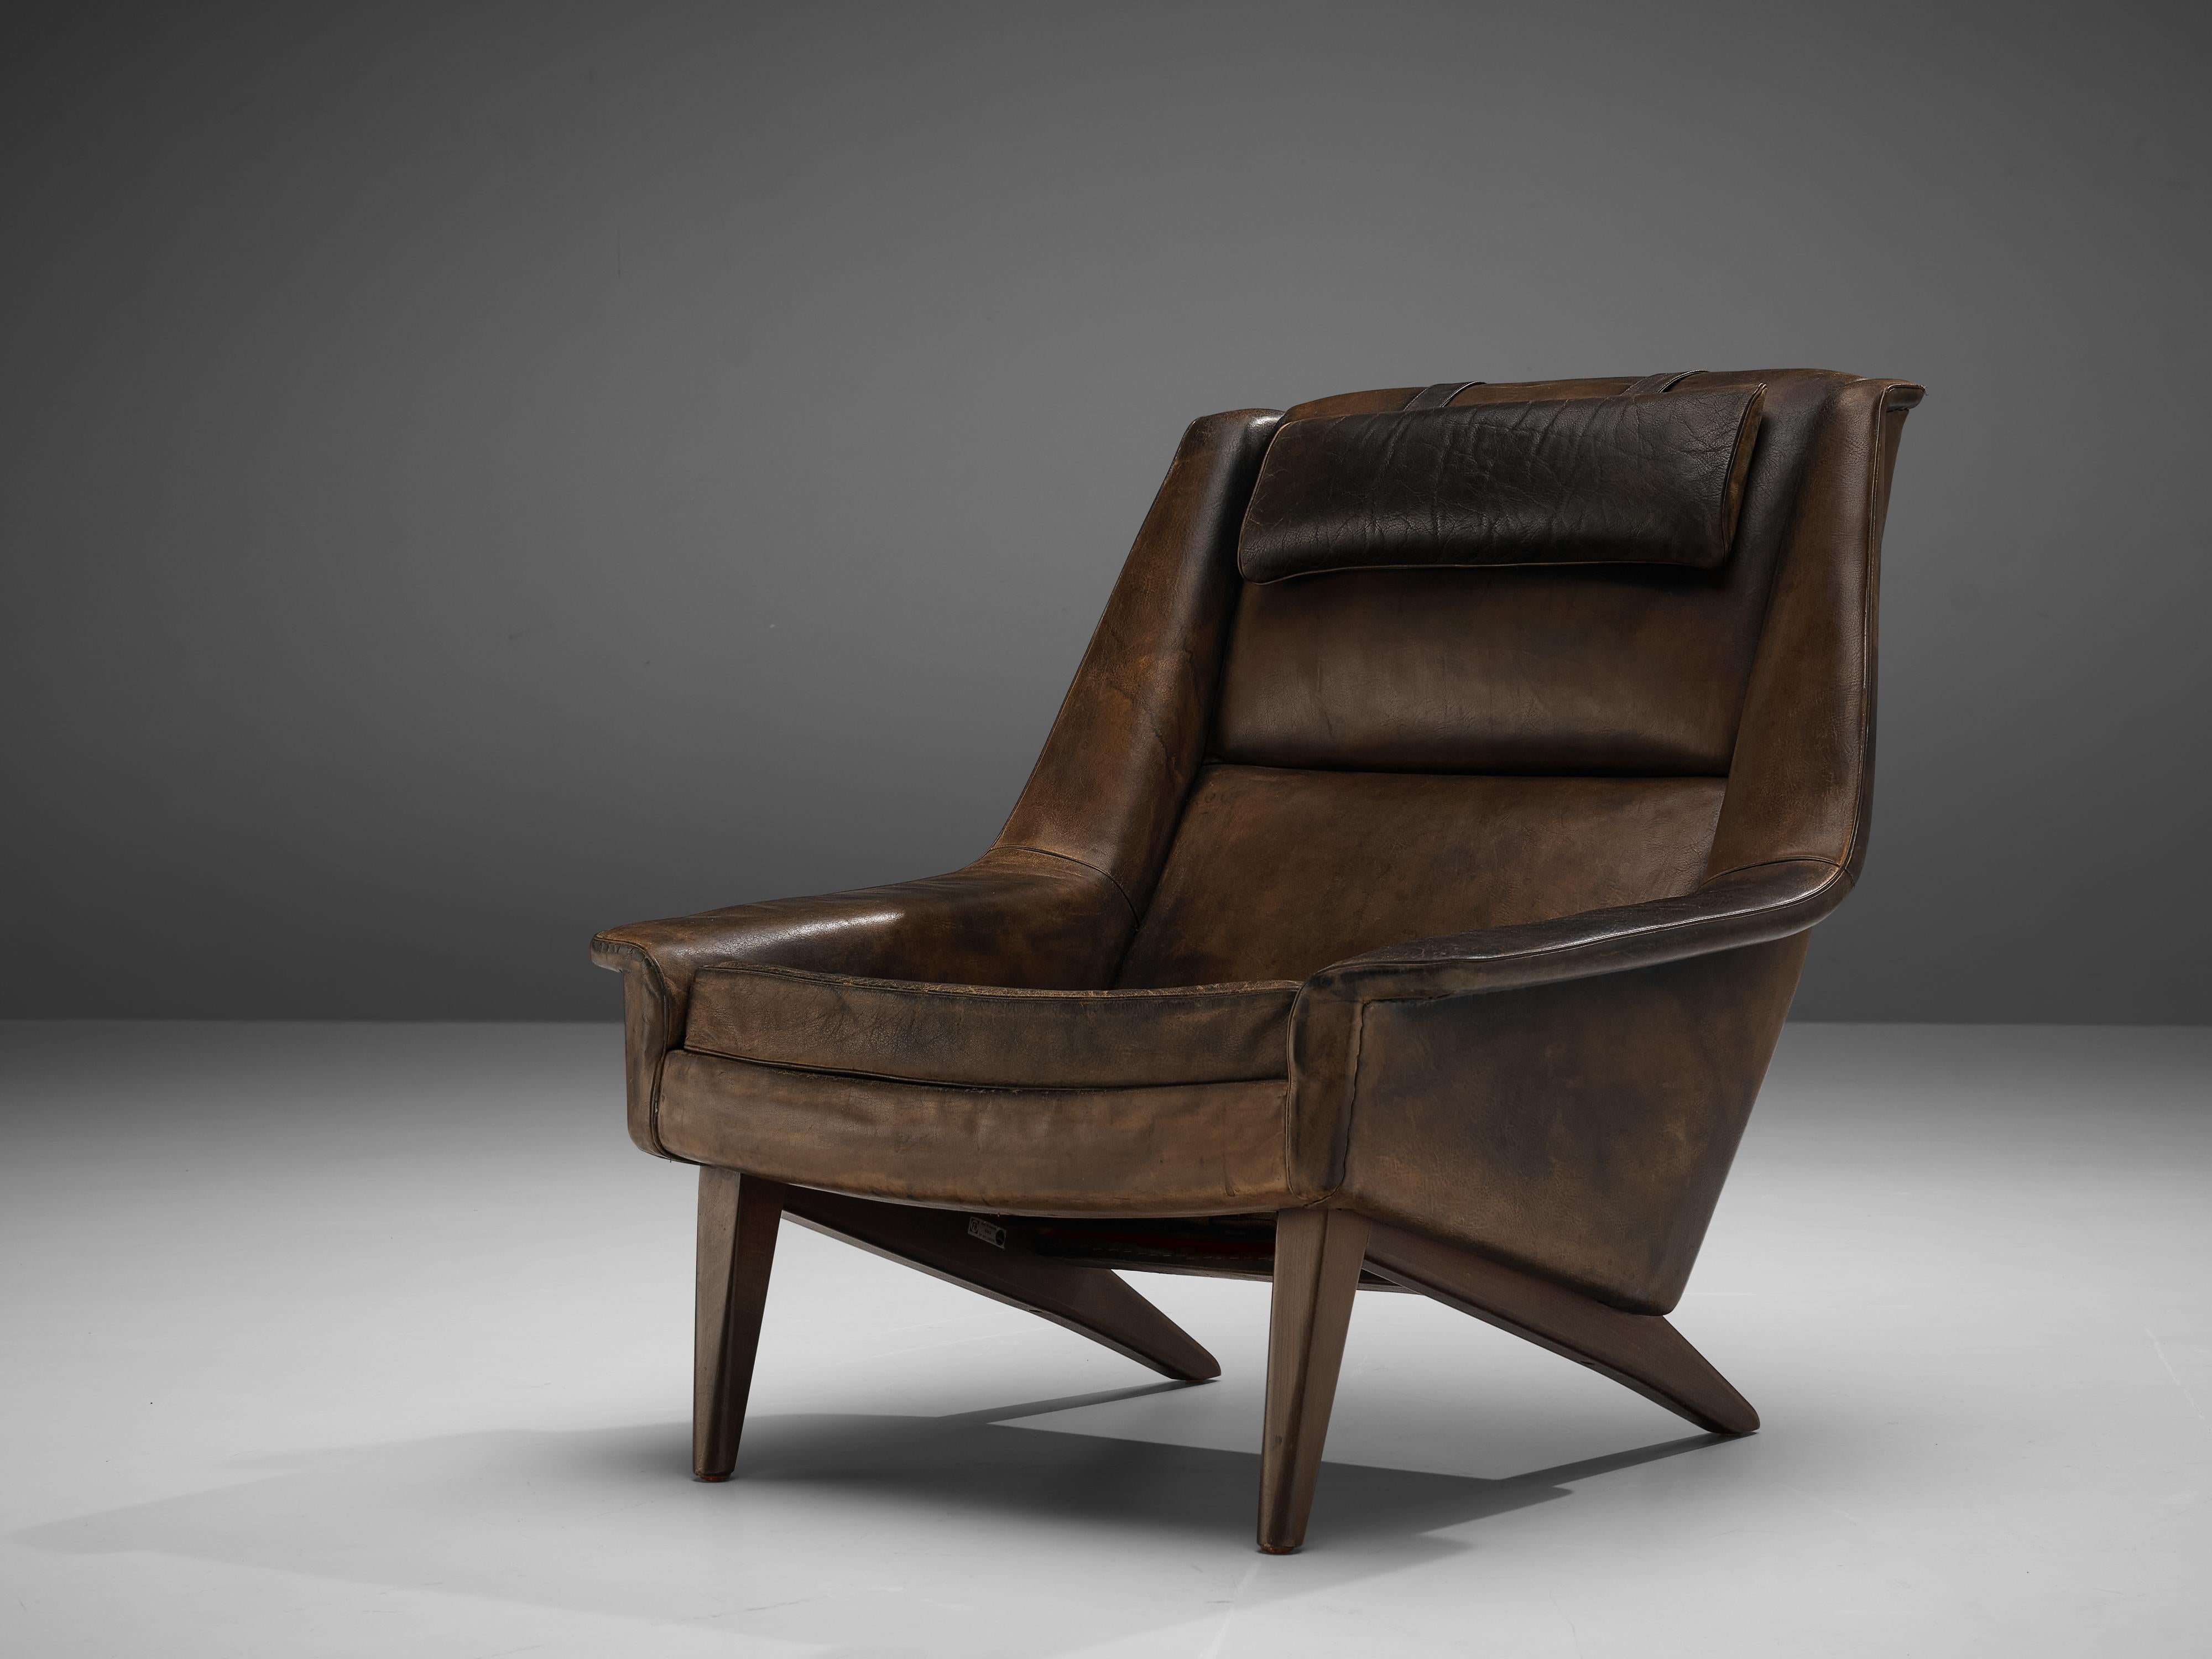 Folke Ohlsson, lounge chair, original brown leather, wood, Denmark, 1960s

With strong resemblance to the designs of Illum Wikkelsø this lounge chair features strong lines that contribute to the comfort. The high, tilted backrest with an additional